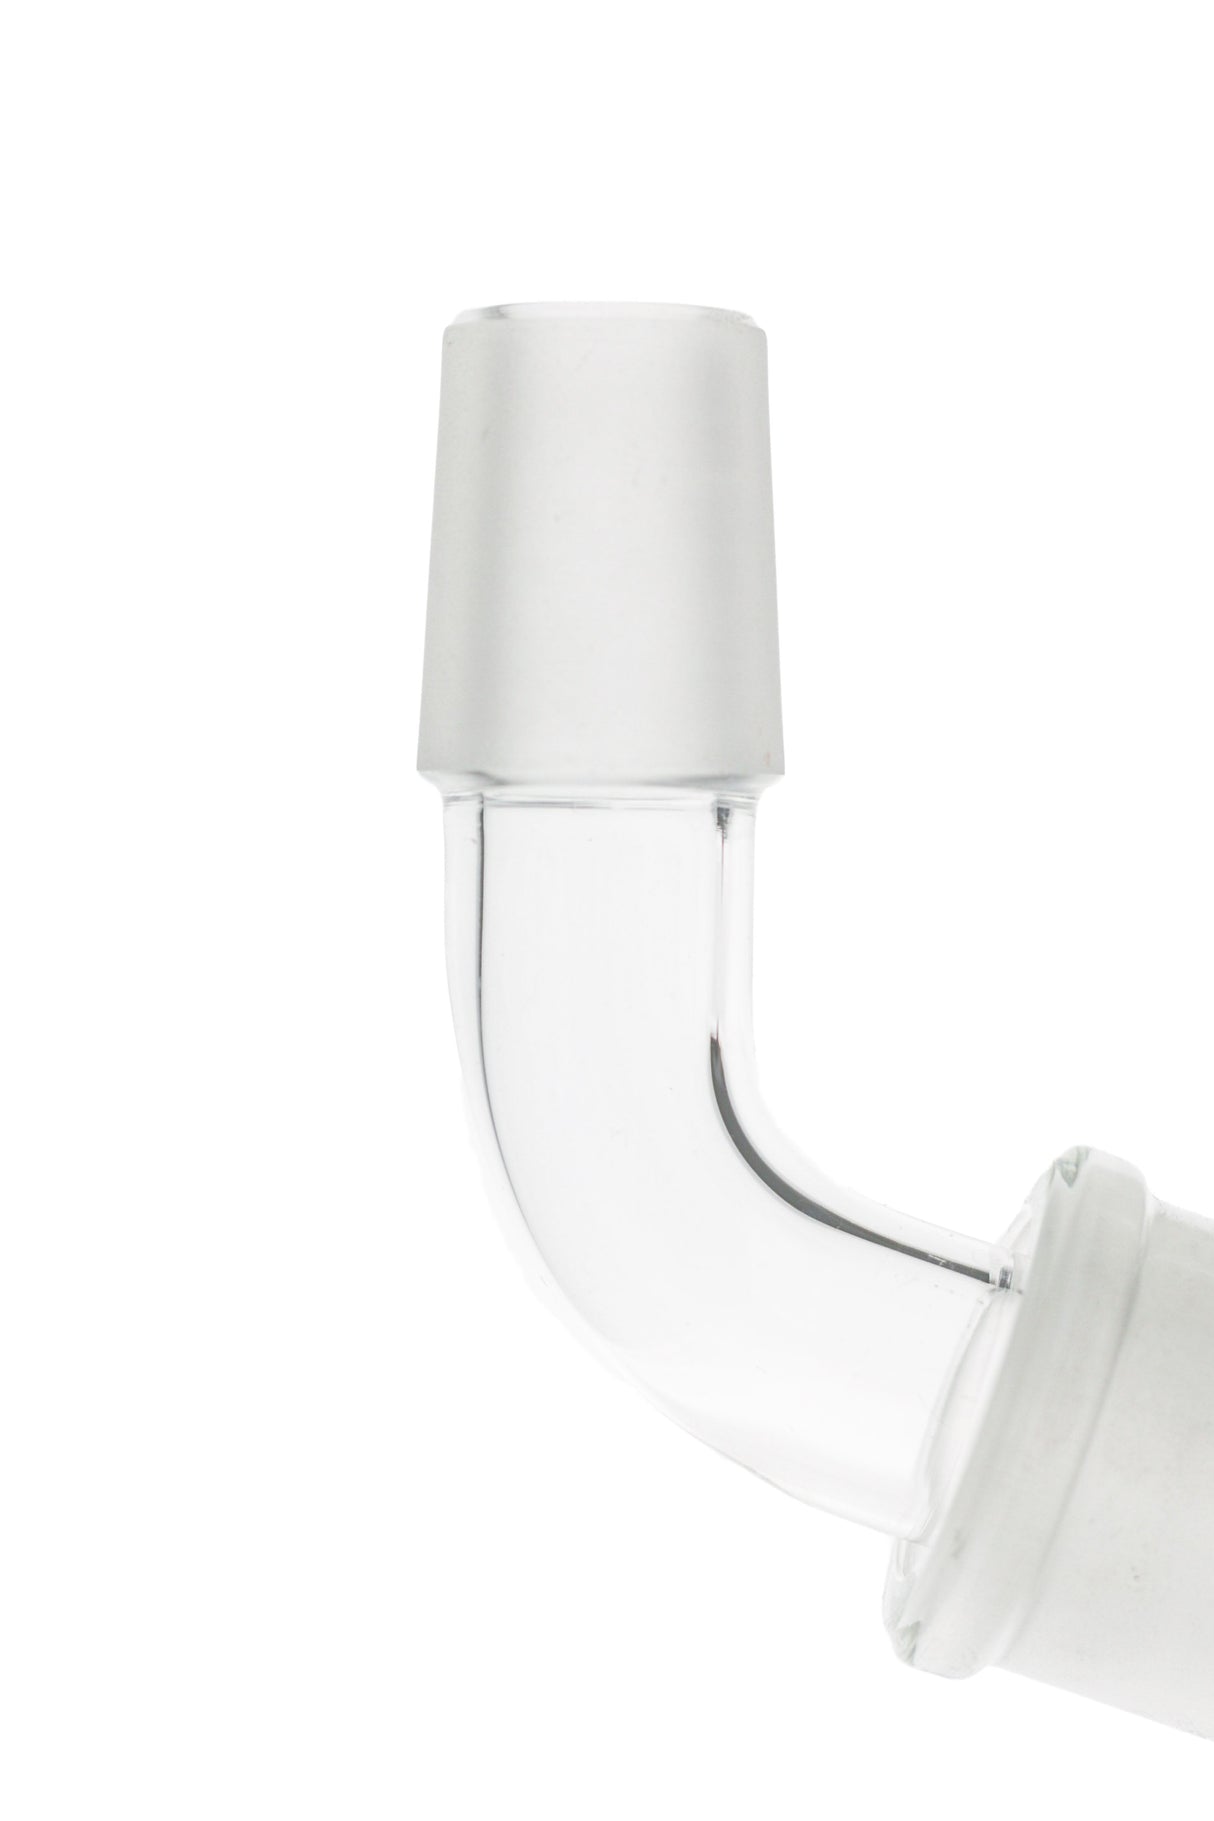 TAG - Quartz Angle Adapter for Bongs, Male-Female Joint, Close-up Side View on White Background